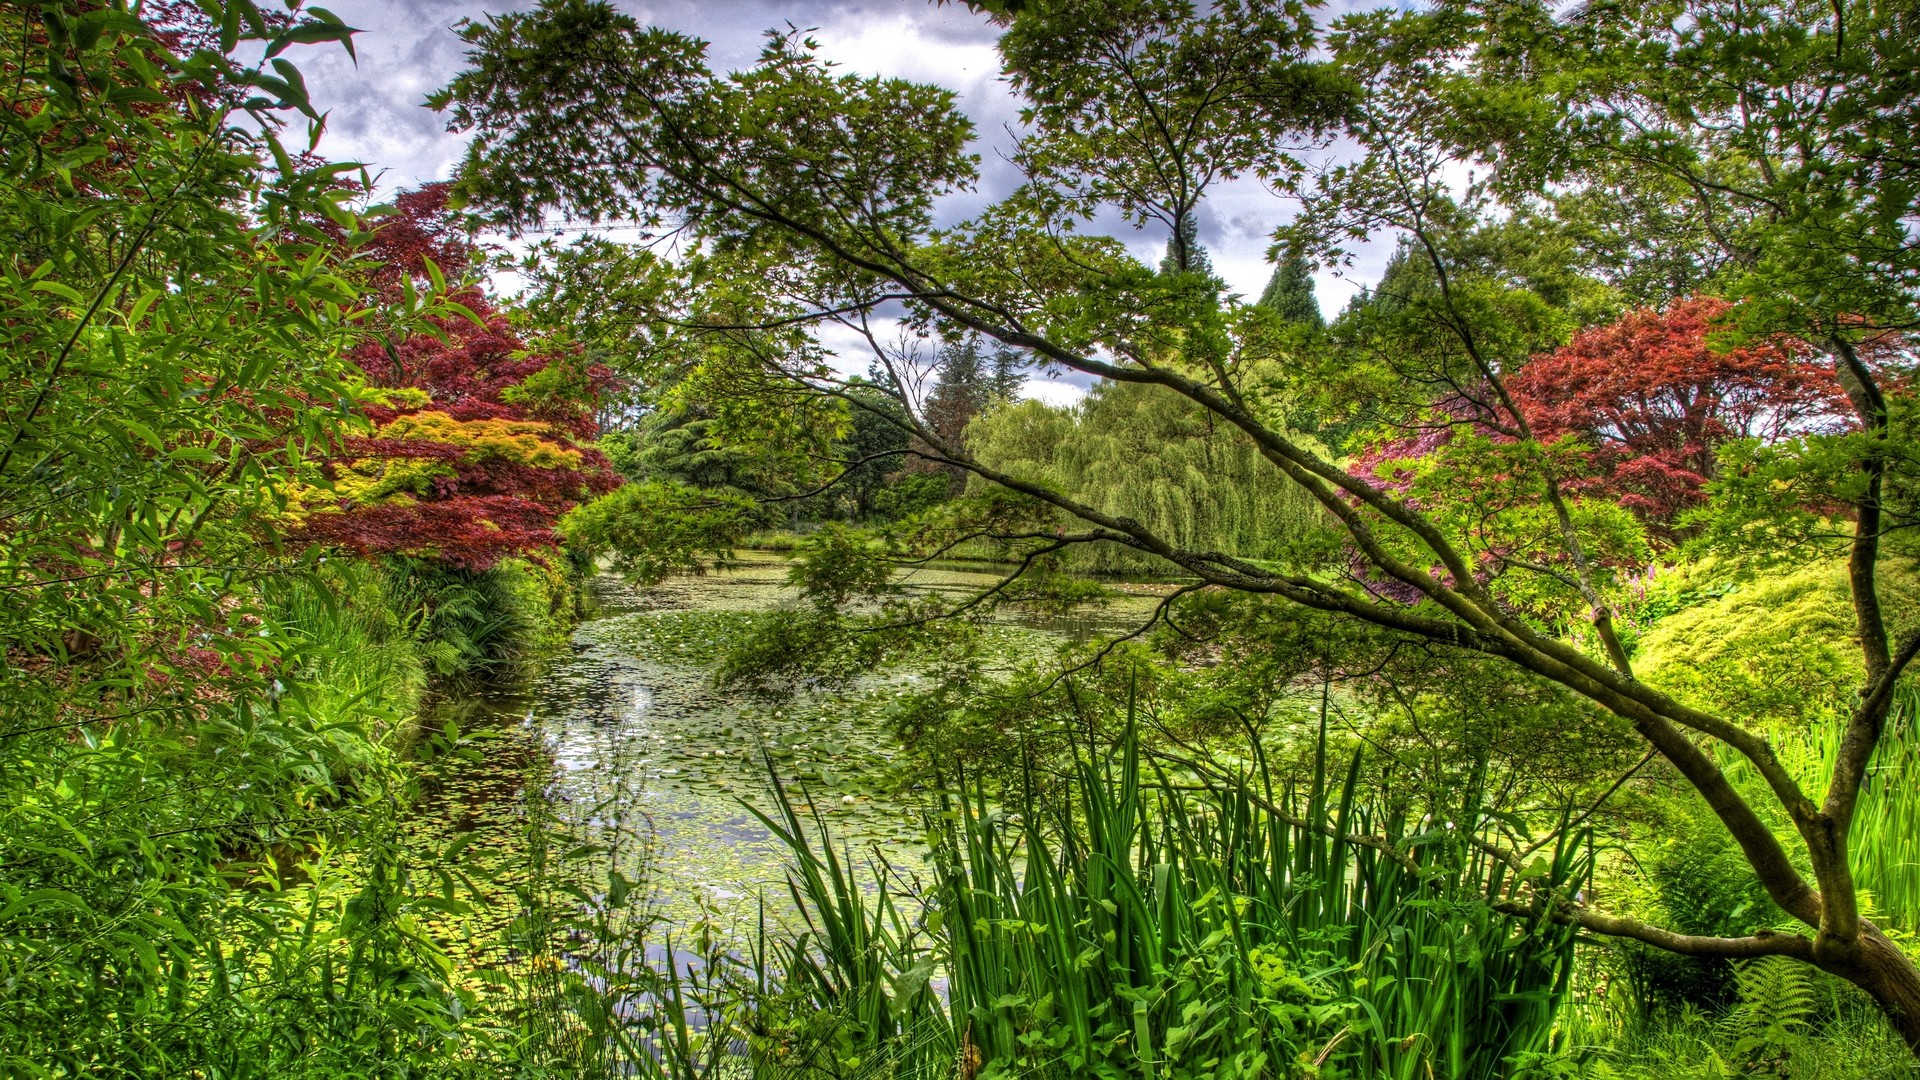 1920x1080 wallpapers: green, garden, trees, pond, flora (image)